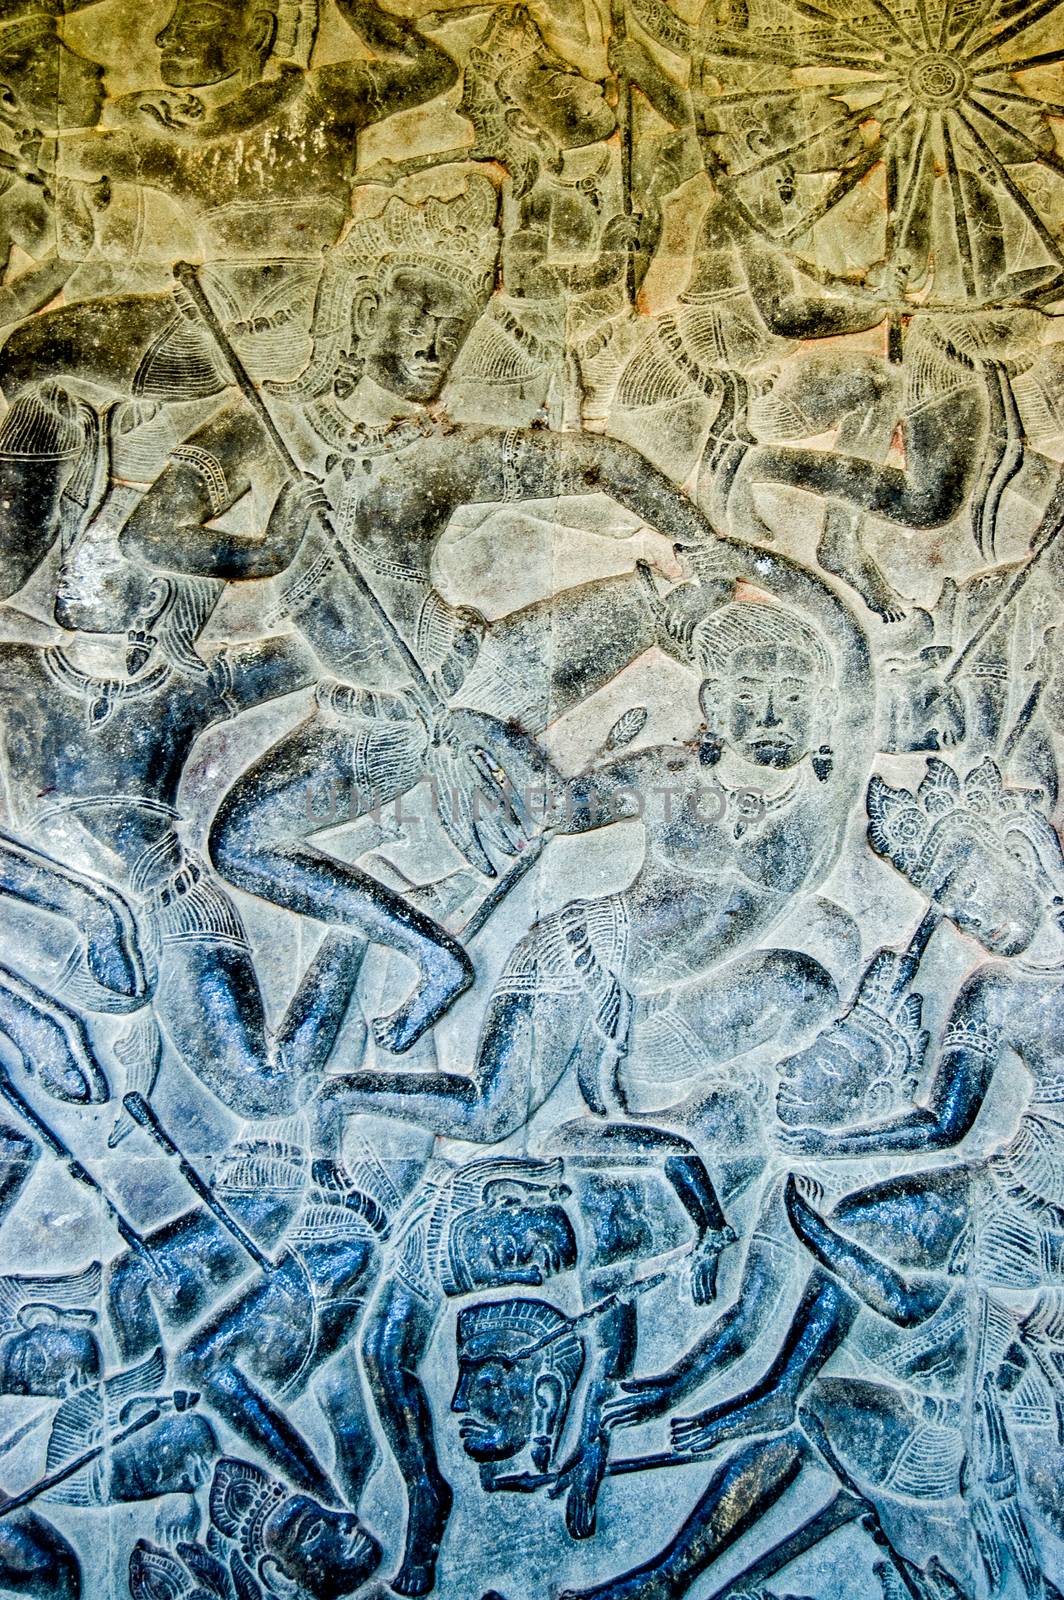 Ancient bas relief carving showing the Hindu god Kama on the side of the Kauravas at the Battle of Kurukshetra. Eleventh century carving, Angkor Wat Temple, Siem Reap, Cambodia.